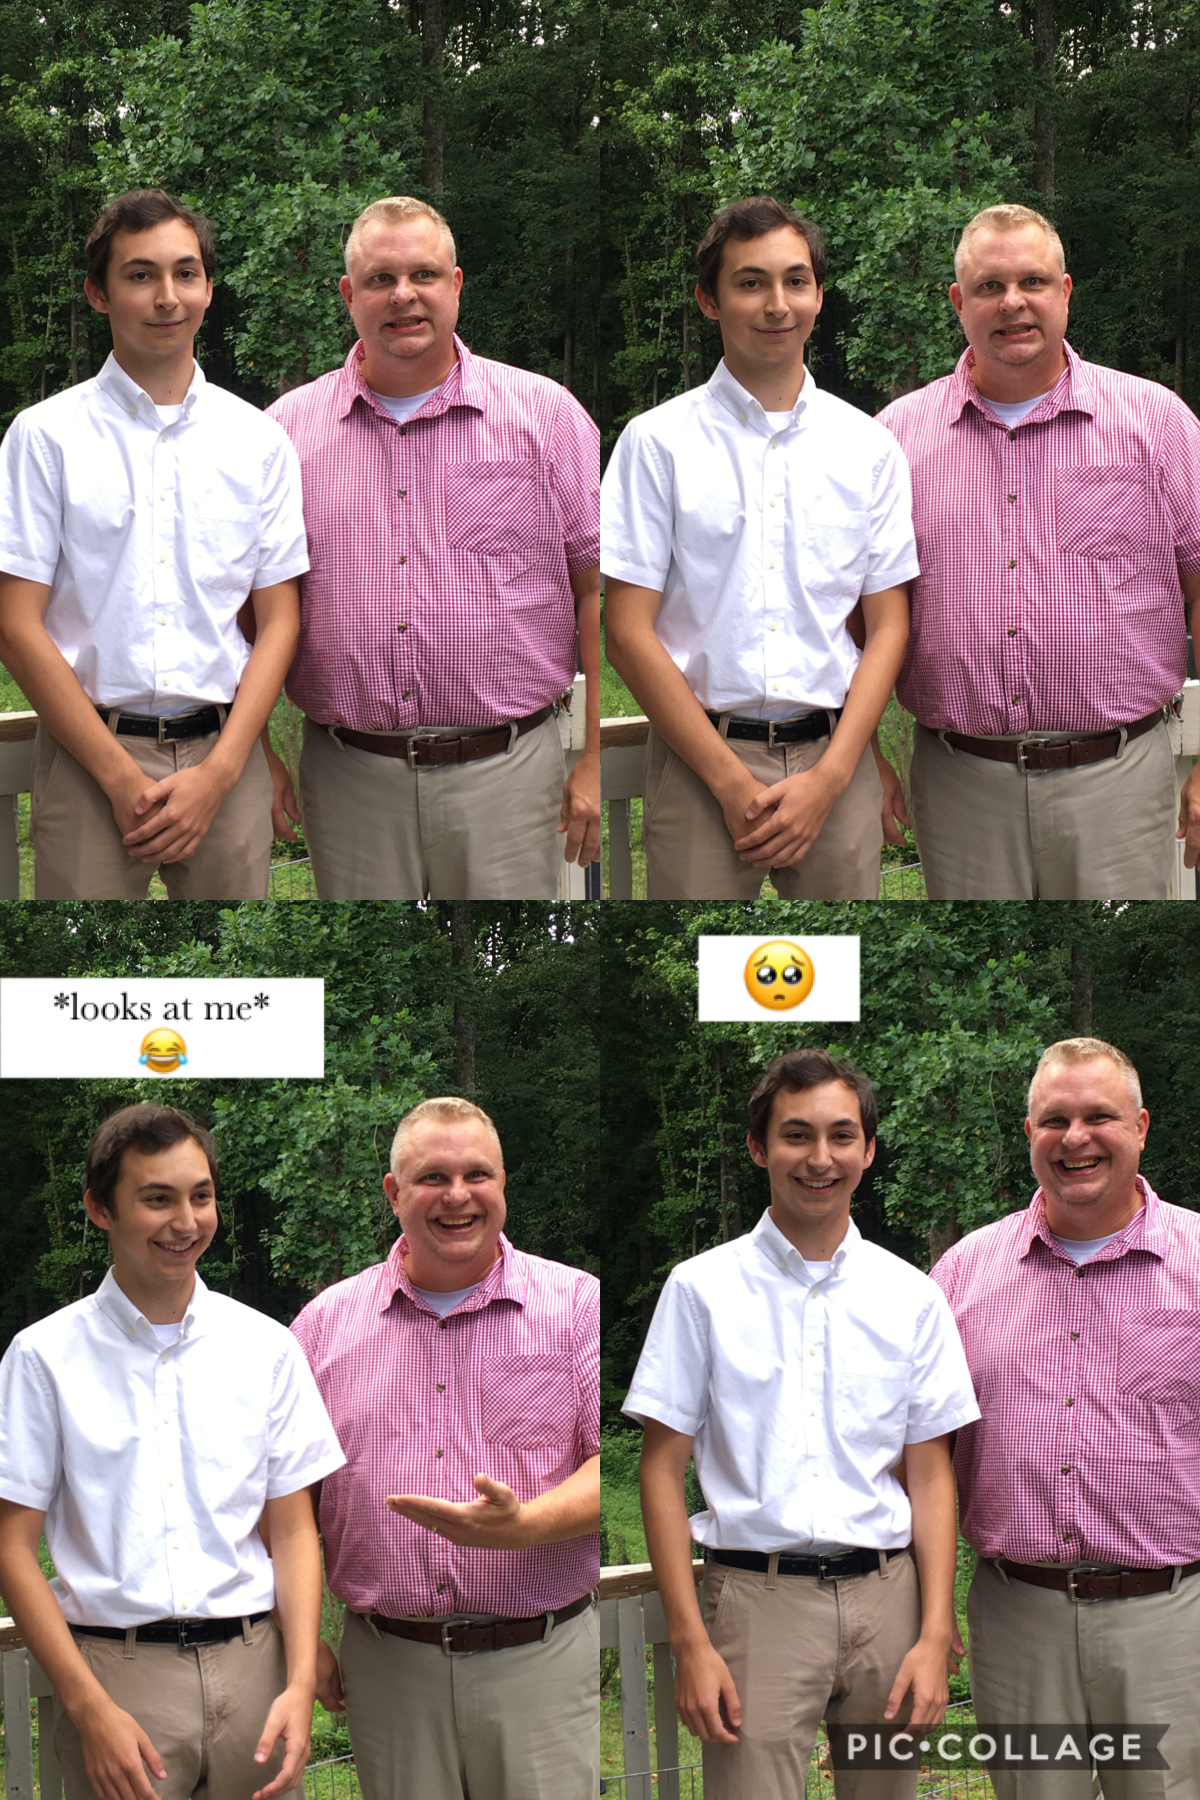 i would just like to share these photos from graduation, James and my dad got to hang out alone for a few hours until they met up with us after bc you weren’t allowed to meet after graduation on the site, so i suggested they take a bro pic and my dad whis